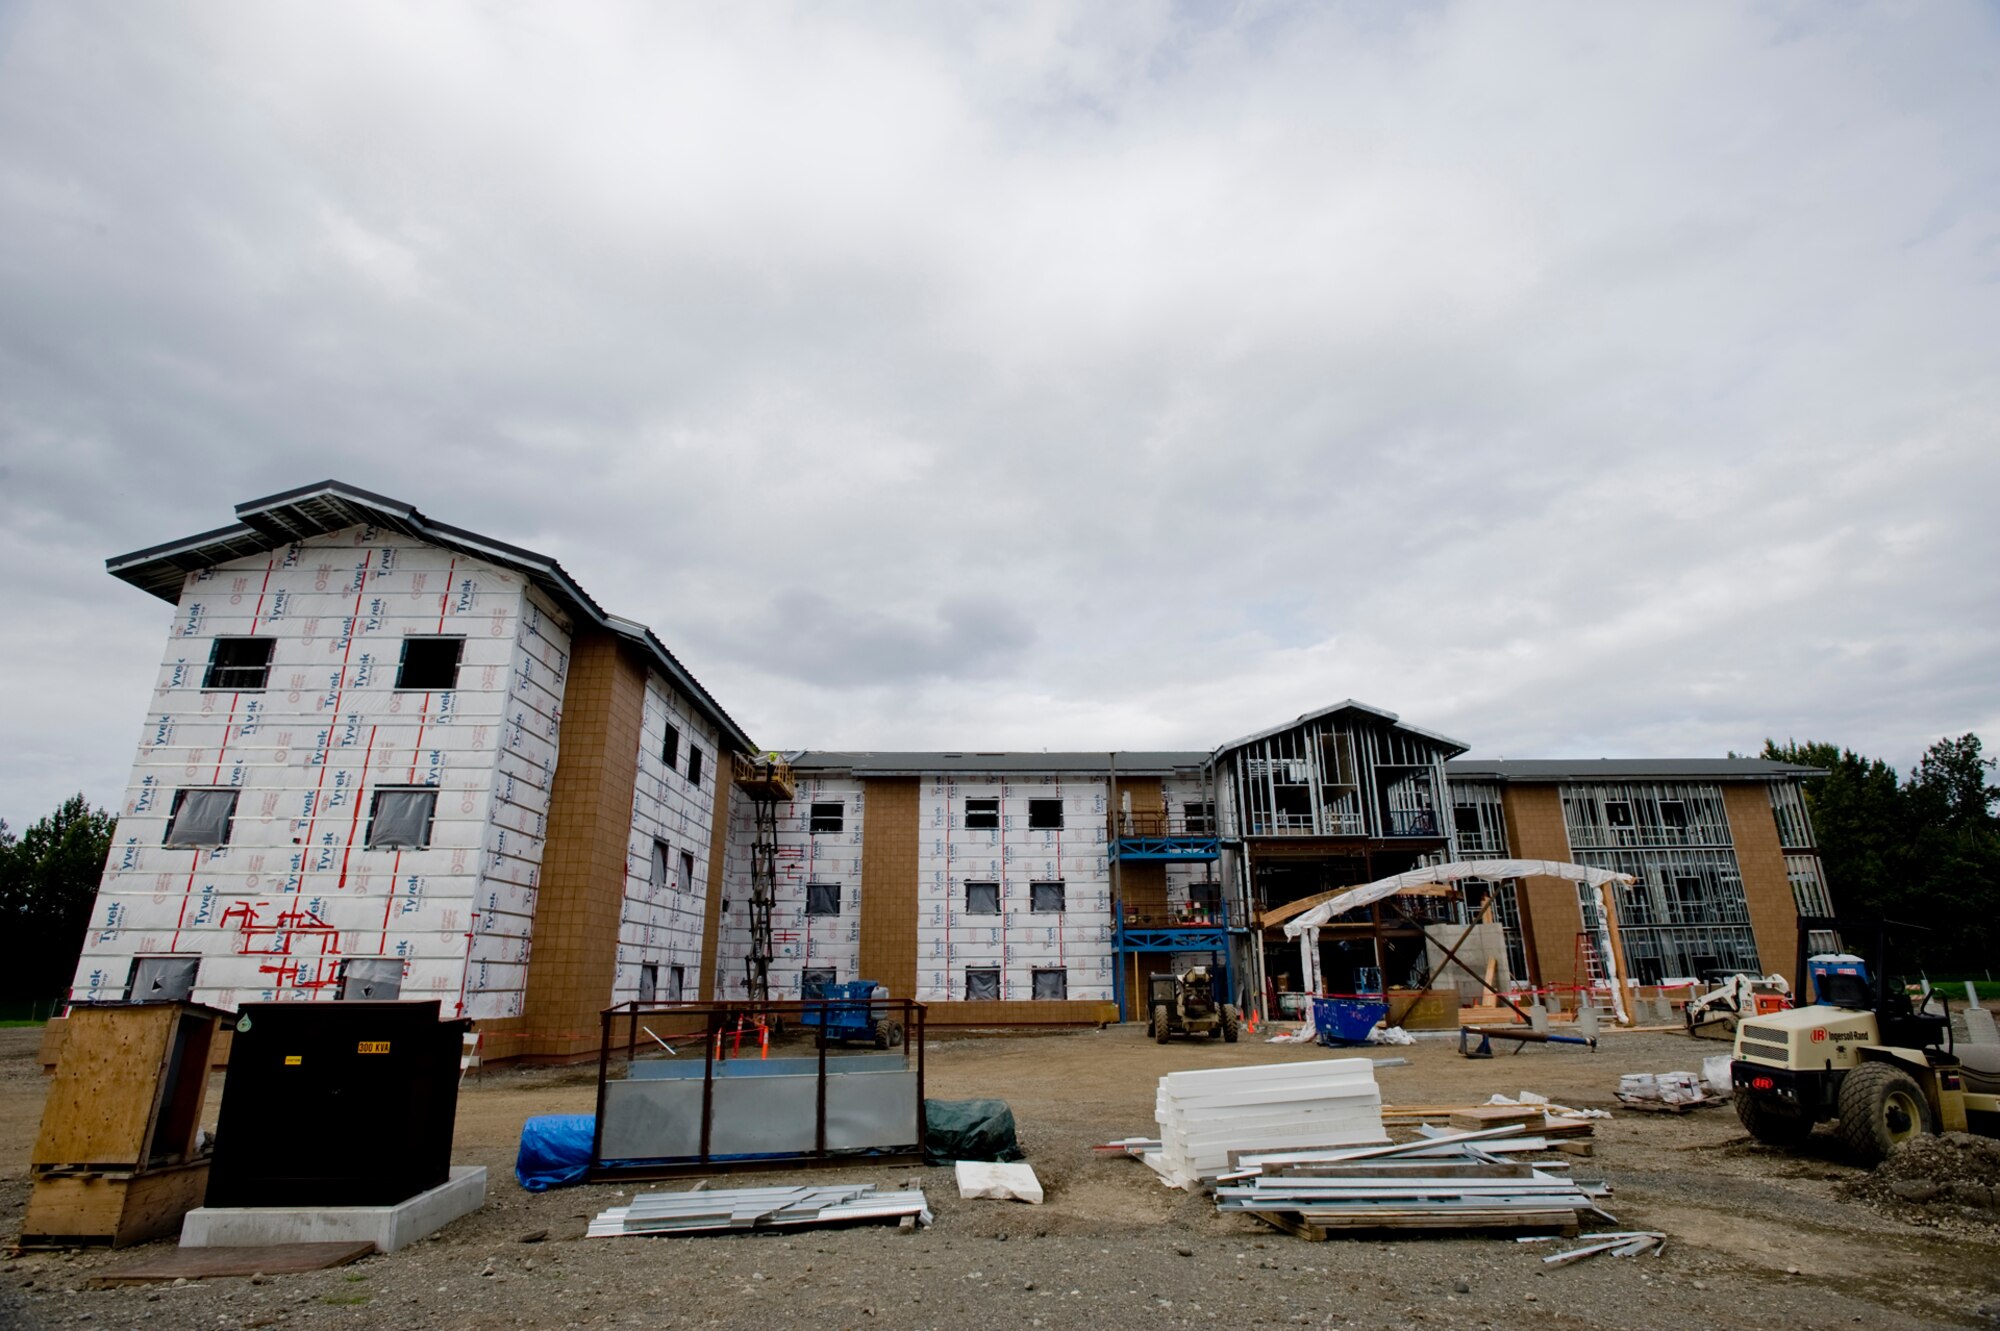 ELMENDORF AIR FORCE BASE, Alaska -- The new dormitory starts to take form as construction continues. More than 25 different sub-contracted companies are working together to ensure the dorm is completed in a timely and efficient manner.  (U.S. Air Force photo/Staff Sgt. Joshua Garcia)